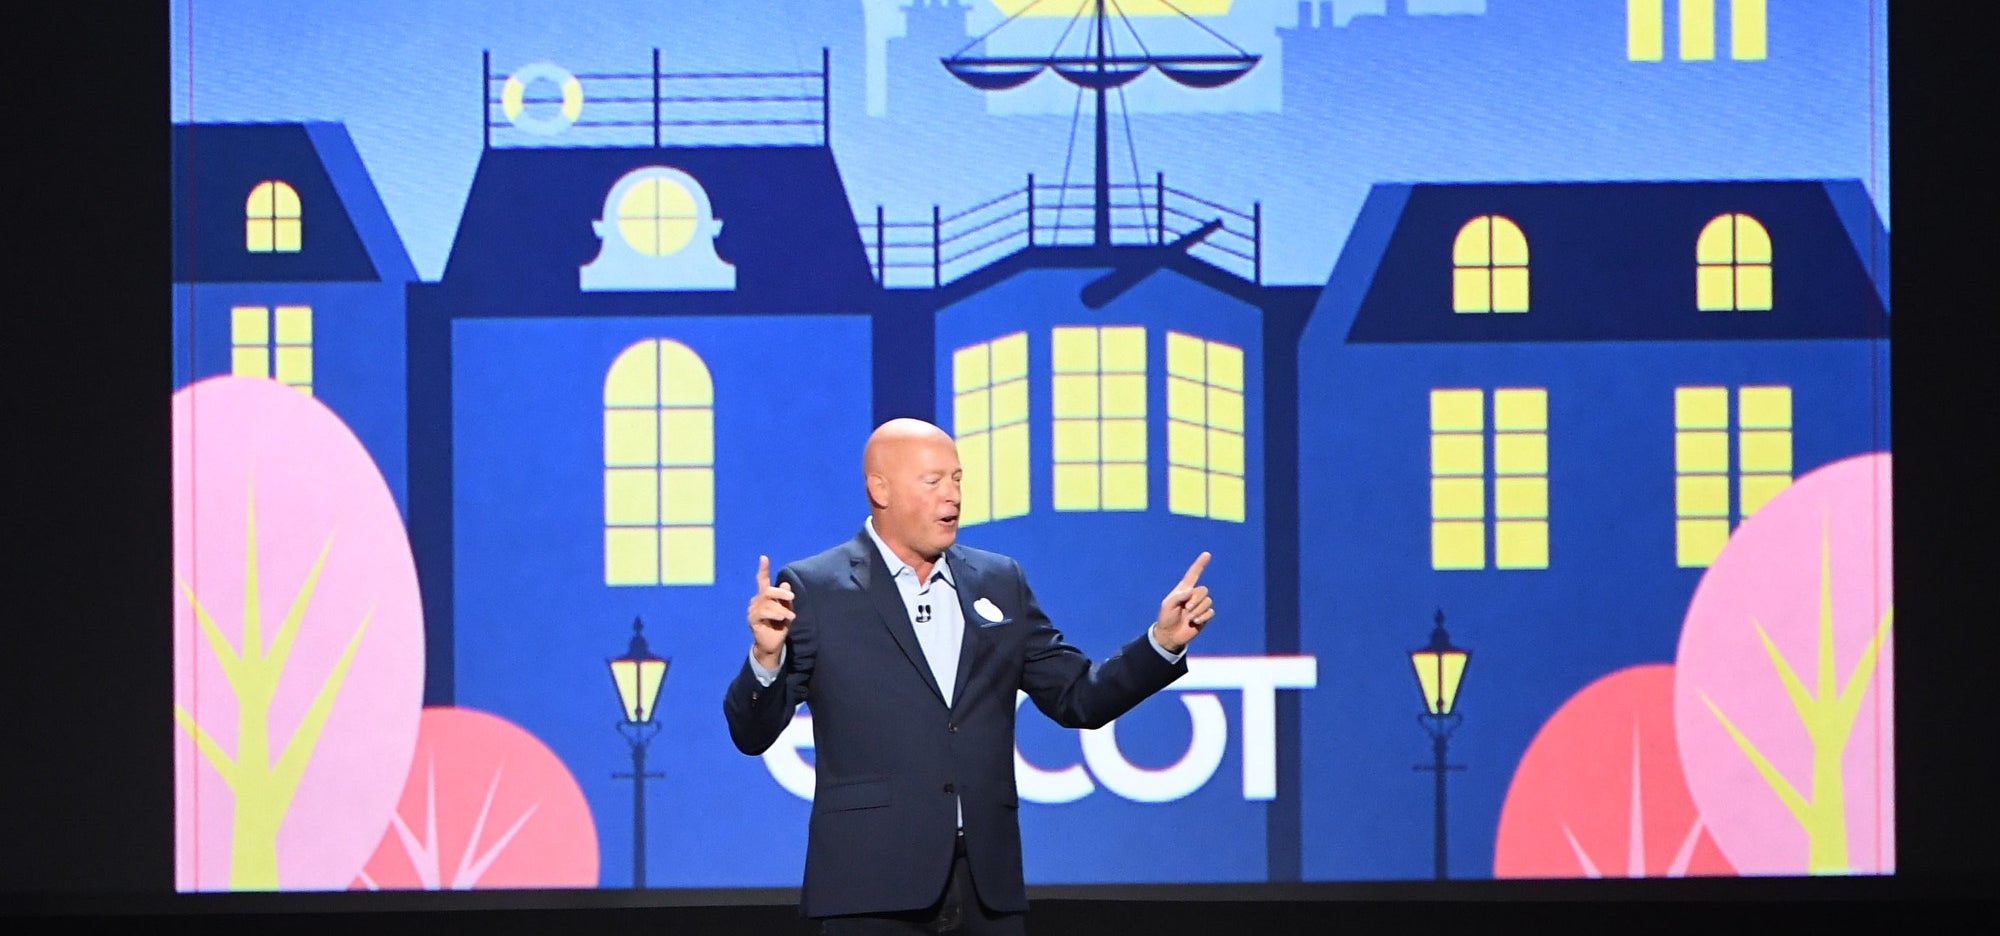 Bob Chapek discusses a &quot;Mary Poppins&quot; enhancement to the England Pavilion at EPCOT at D23 in 2019